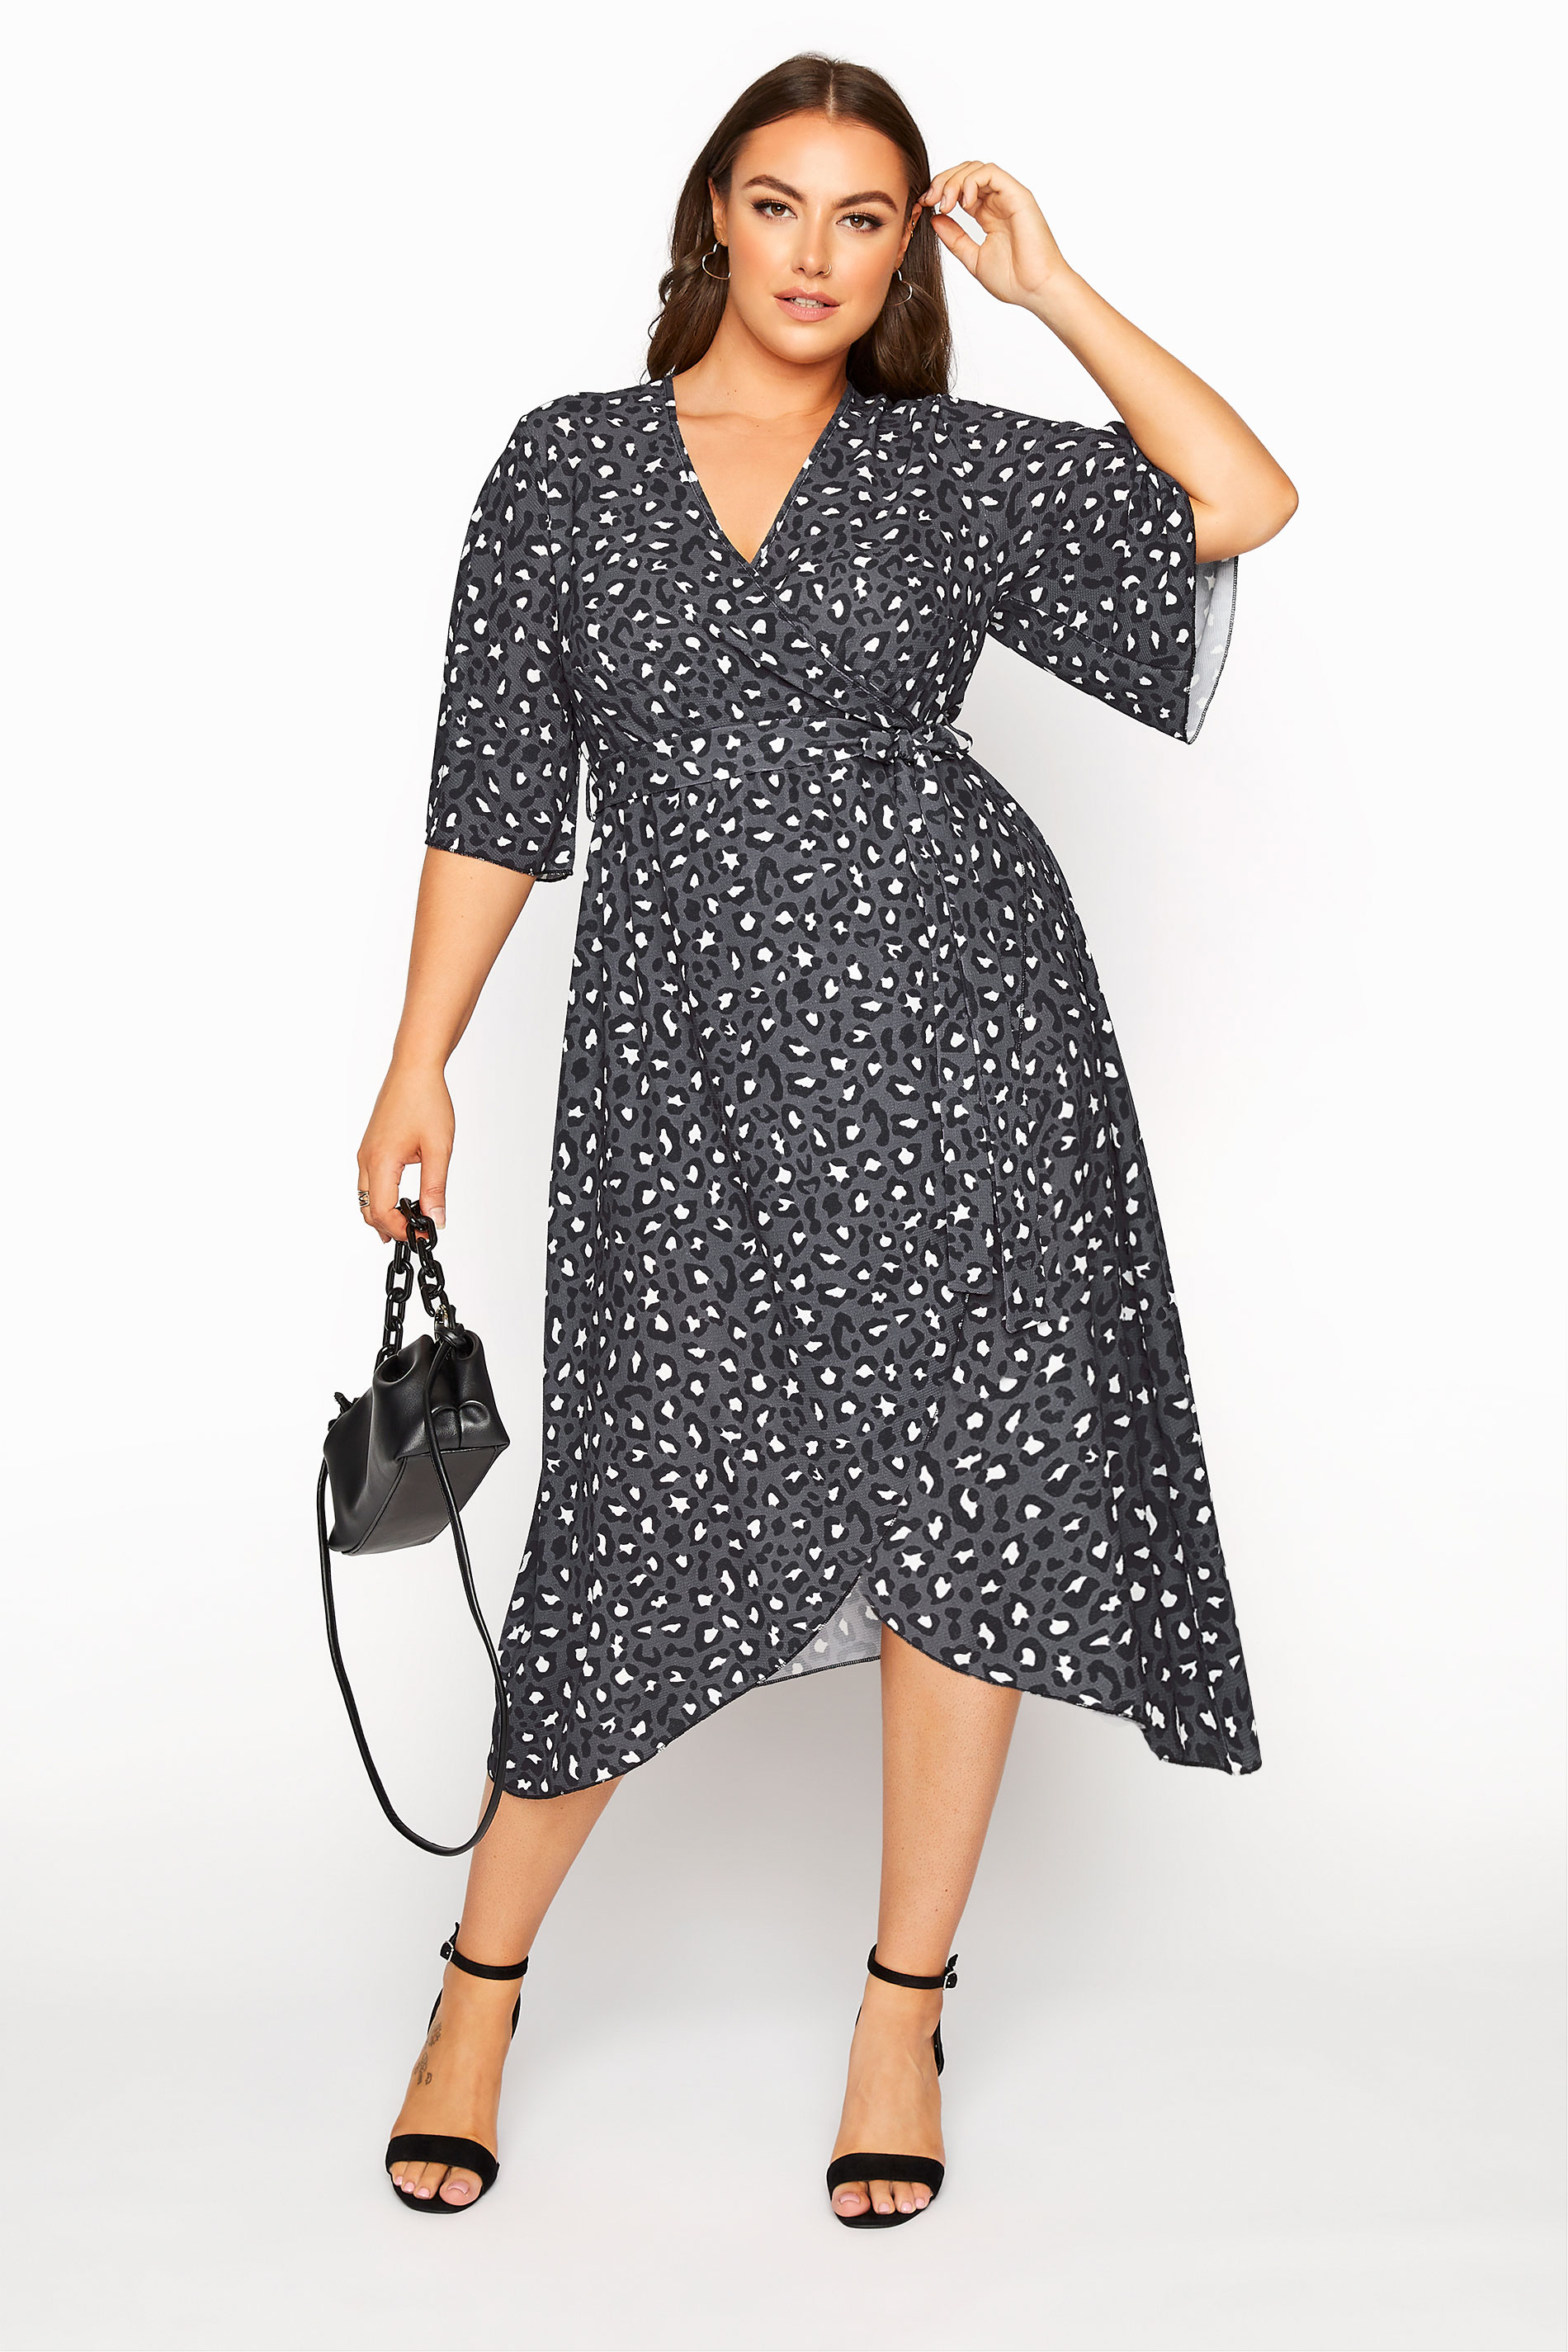 Robes Grande Taille Grande taille  Robes Portefeuilles | YOURS LONDON - Robe Grise Cache-Coeur Léopard - MD07840